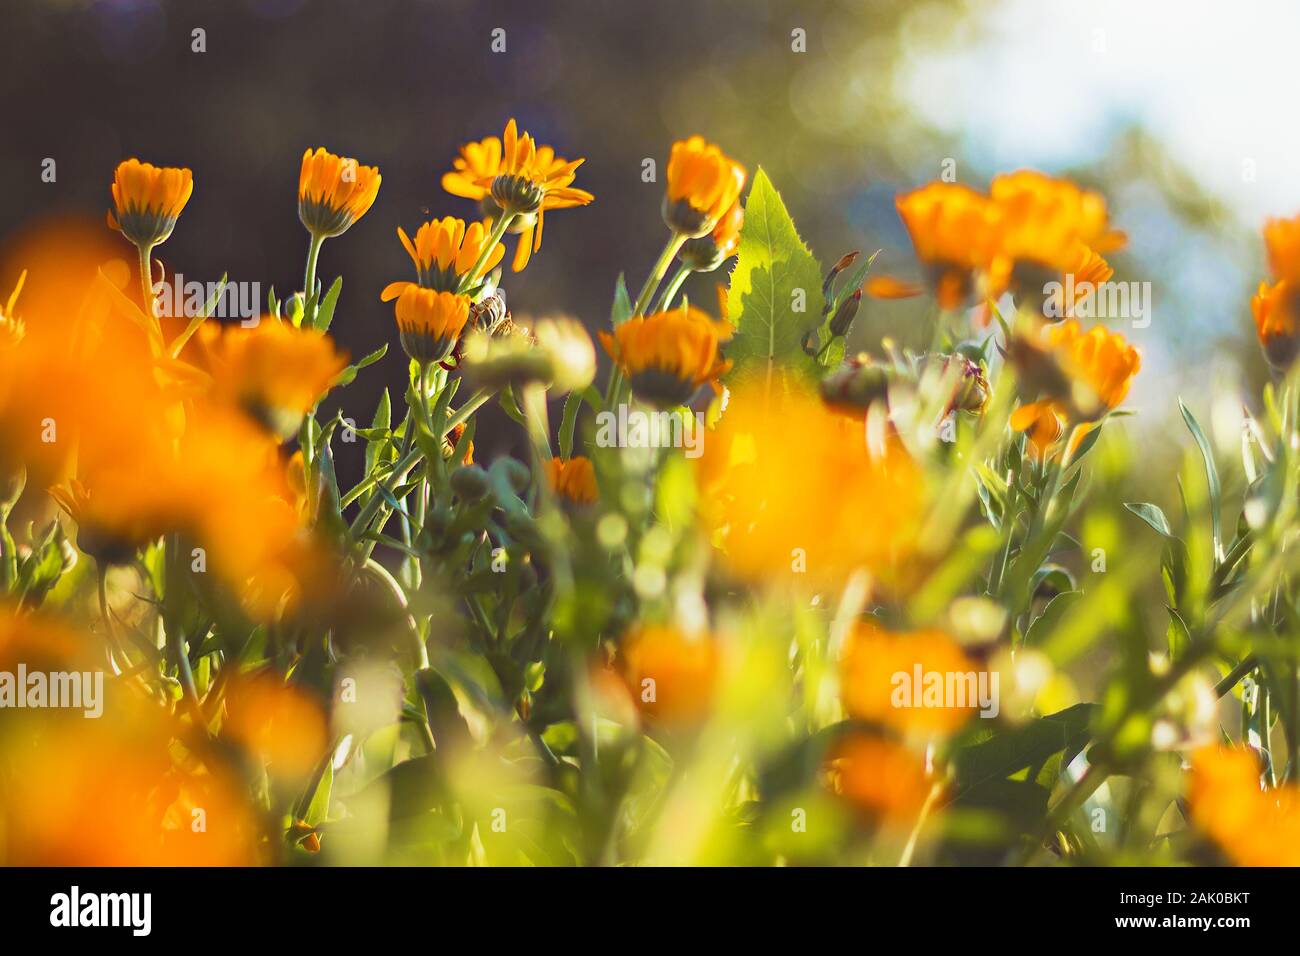 Beautiful orange flowers (Marigold) in the garden - close up view, bright sunny day, blurred background Stock Photo